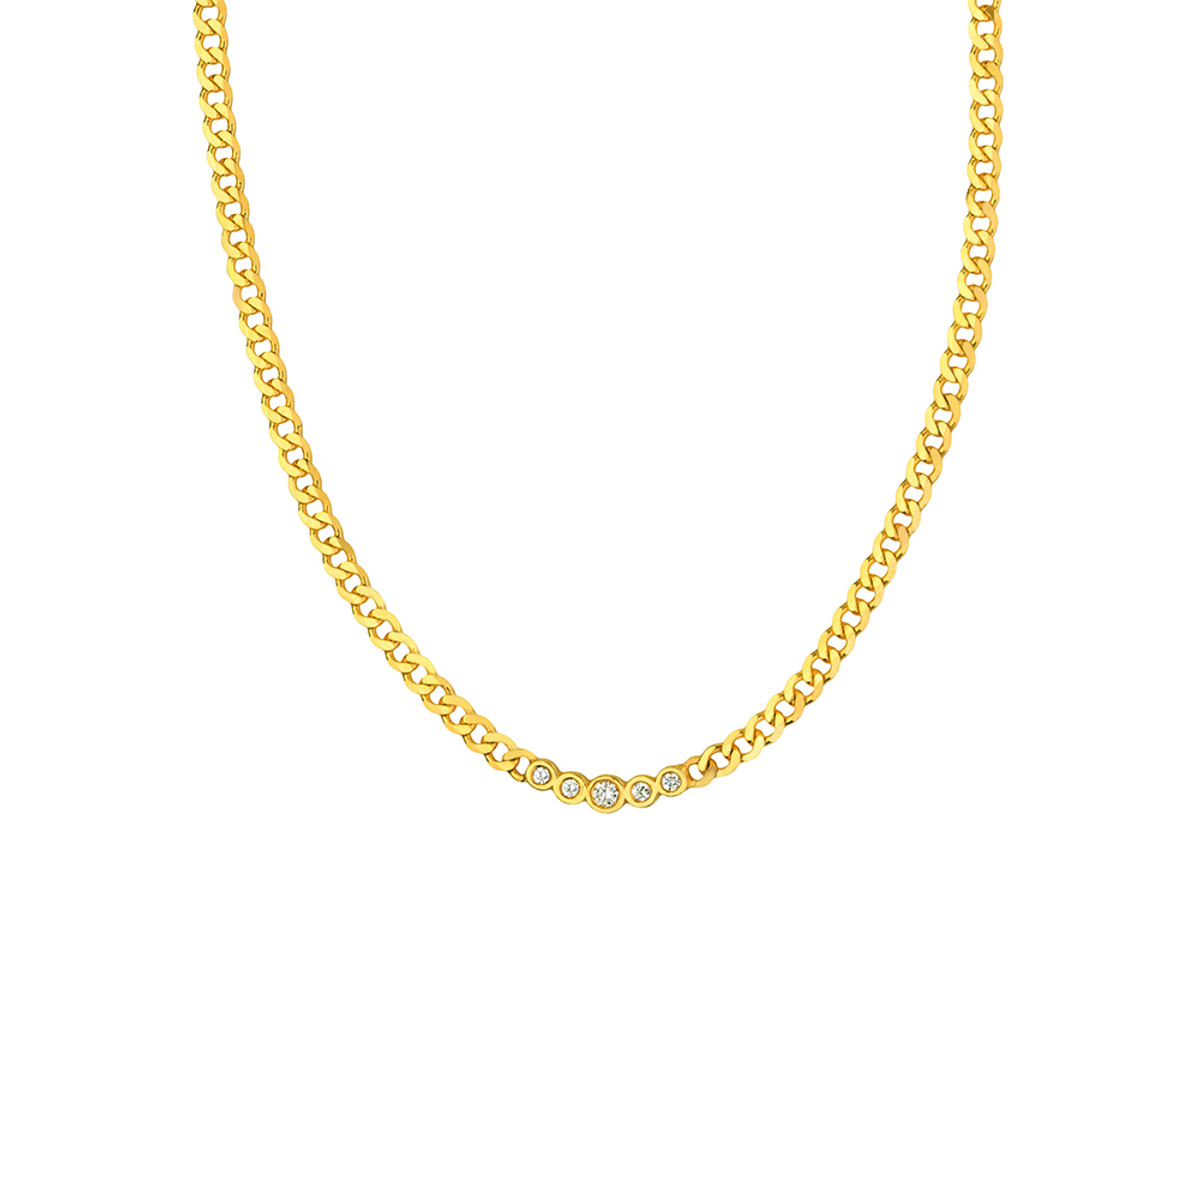 Hyde Park 14k Yellow gold 18" Adjustable 5-Diamond Curb Link Chain Necklace-23777